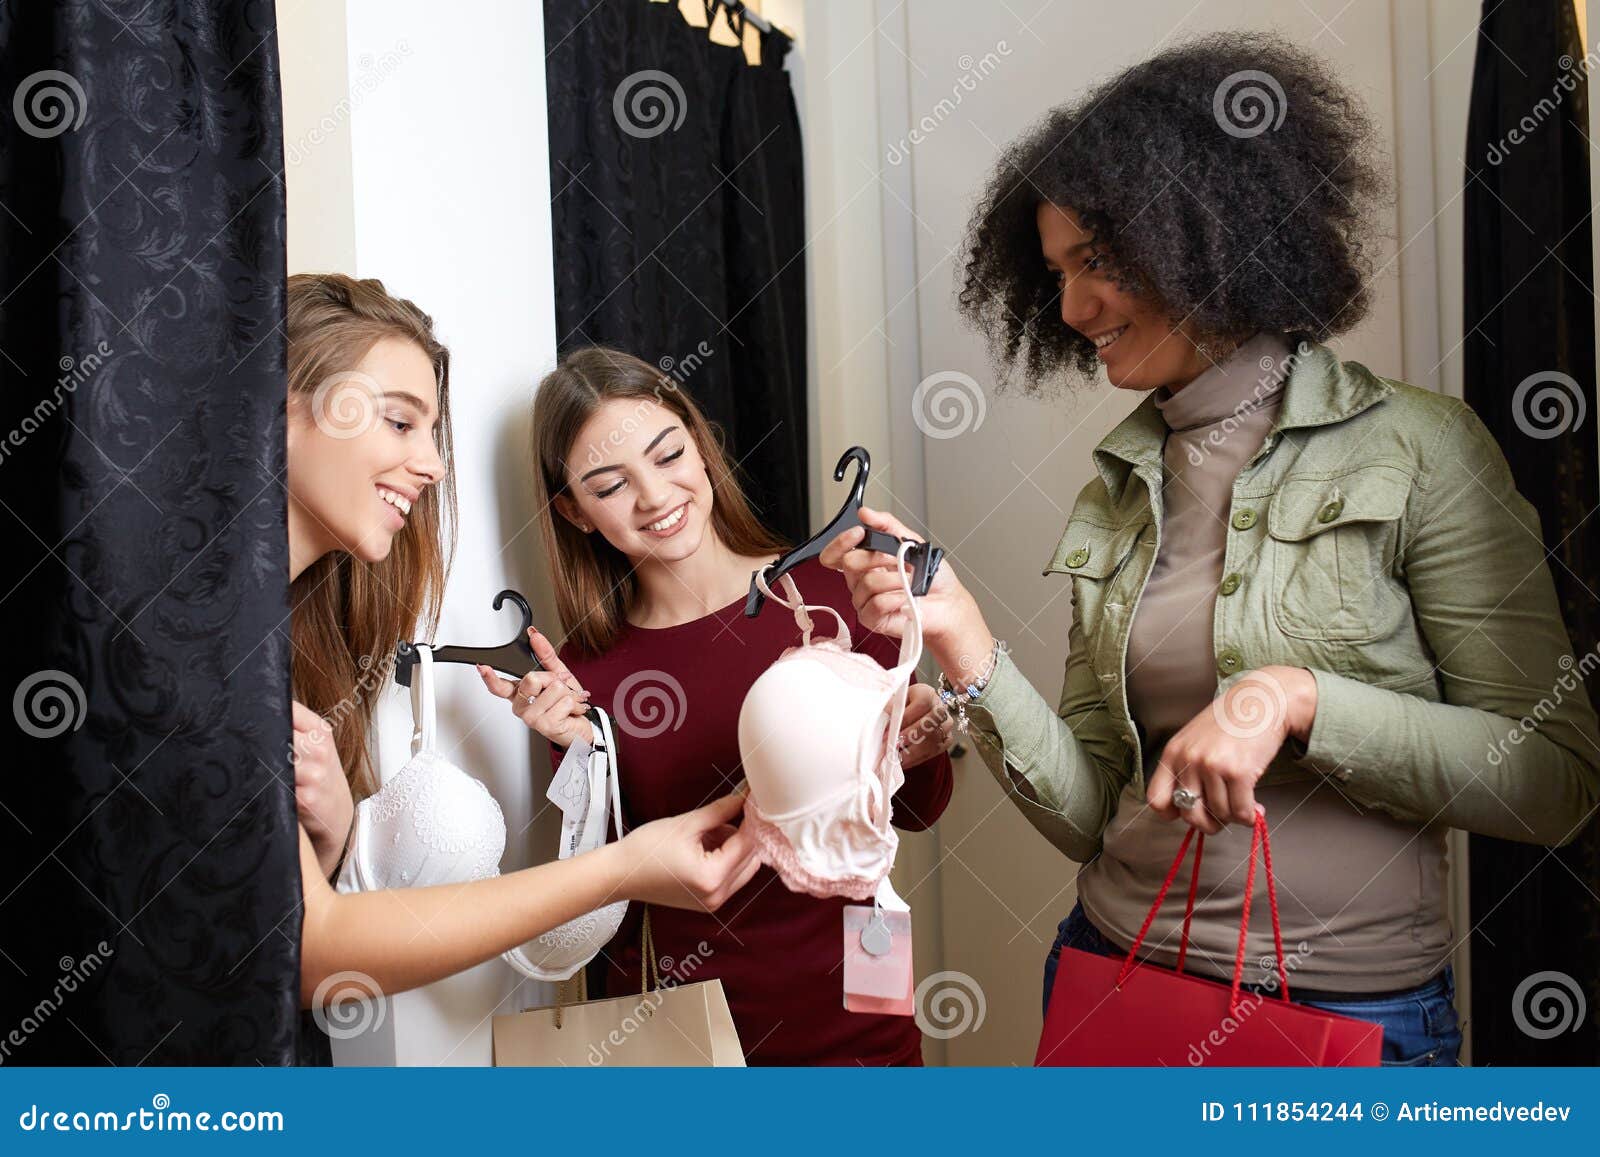 121 Young Women Choosing Lingerie Stock Photos - Free & Royalty-Free Stock  Photos from Dreamstime